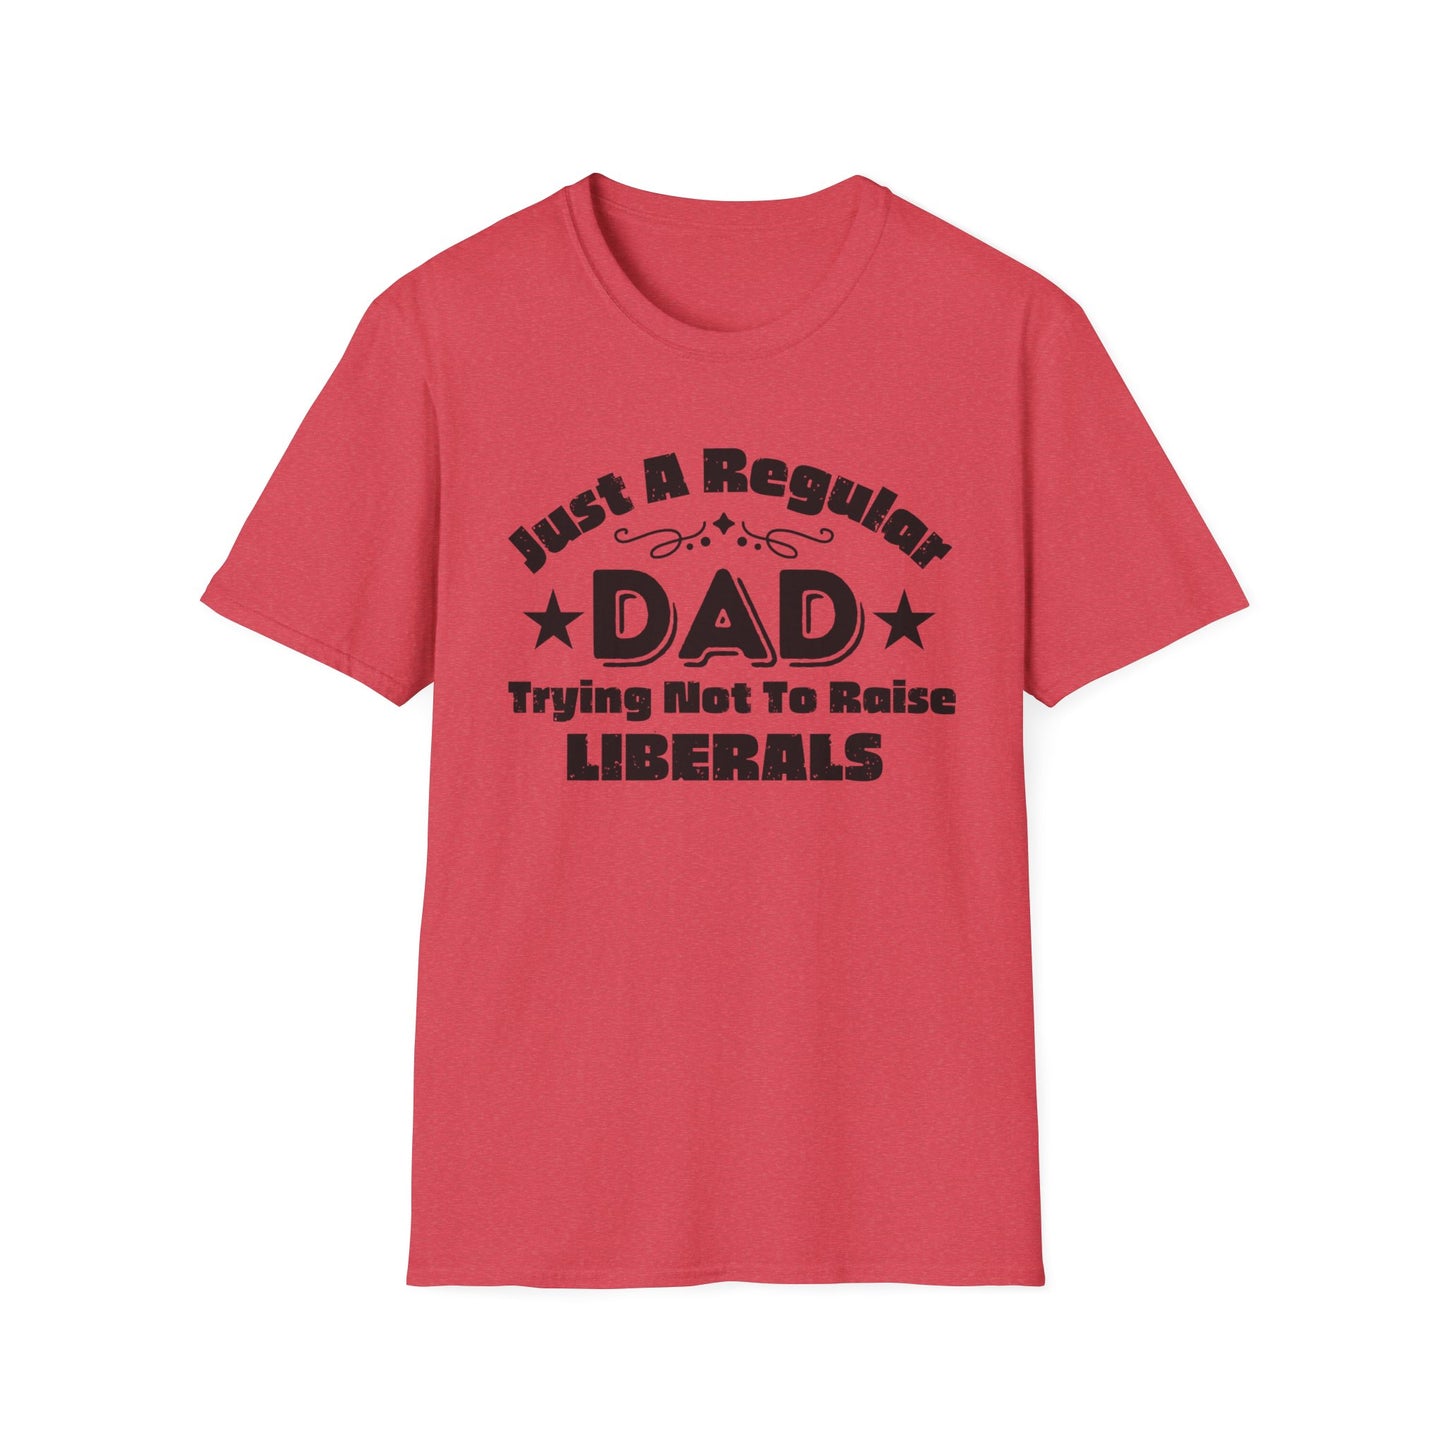 Just a regular dad trying not to raise liberals - Unisex Softstyle T-Shirt cc